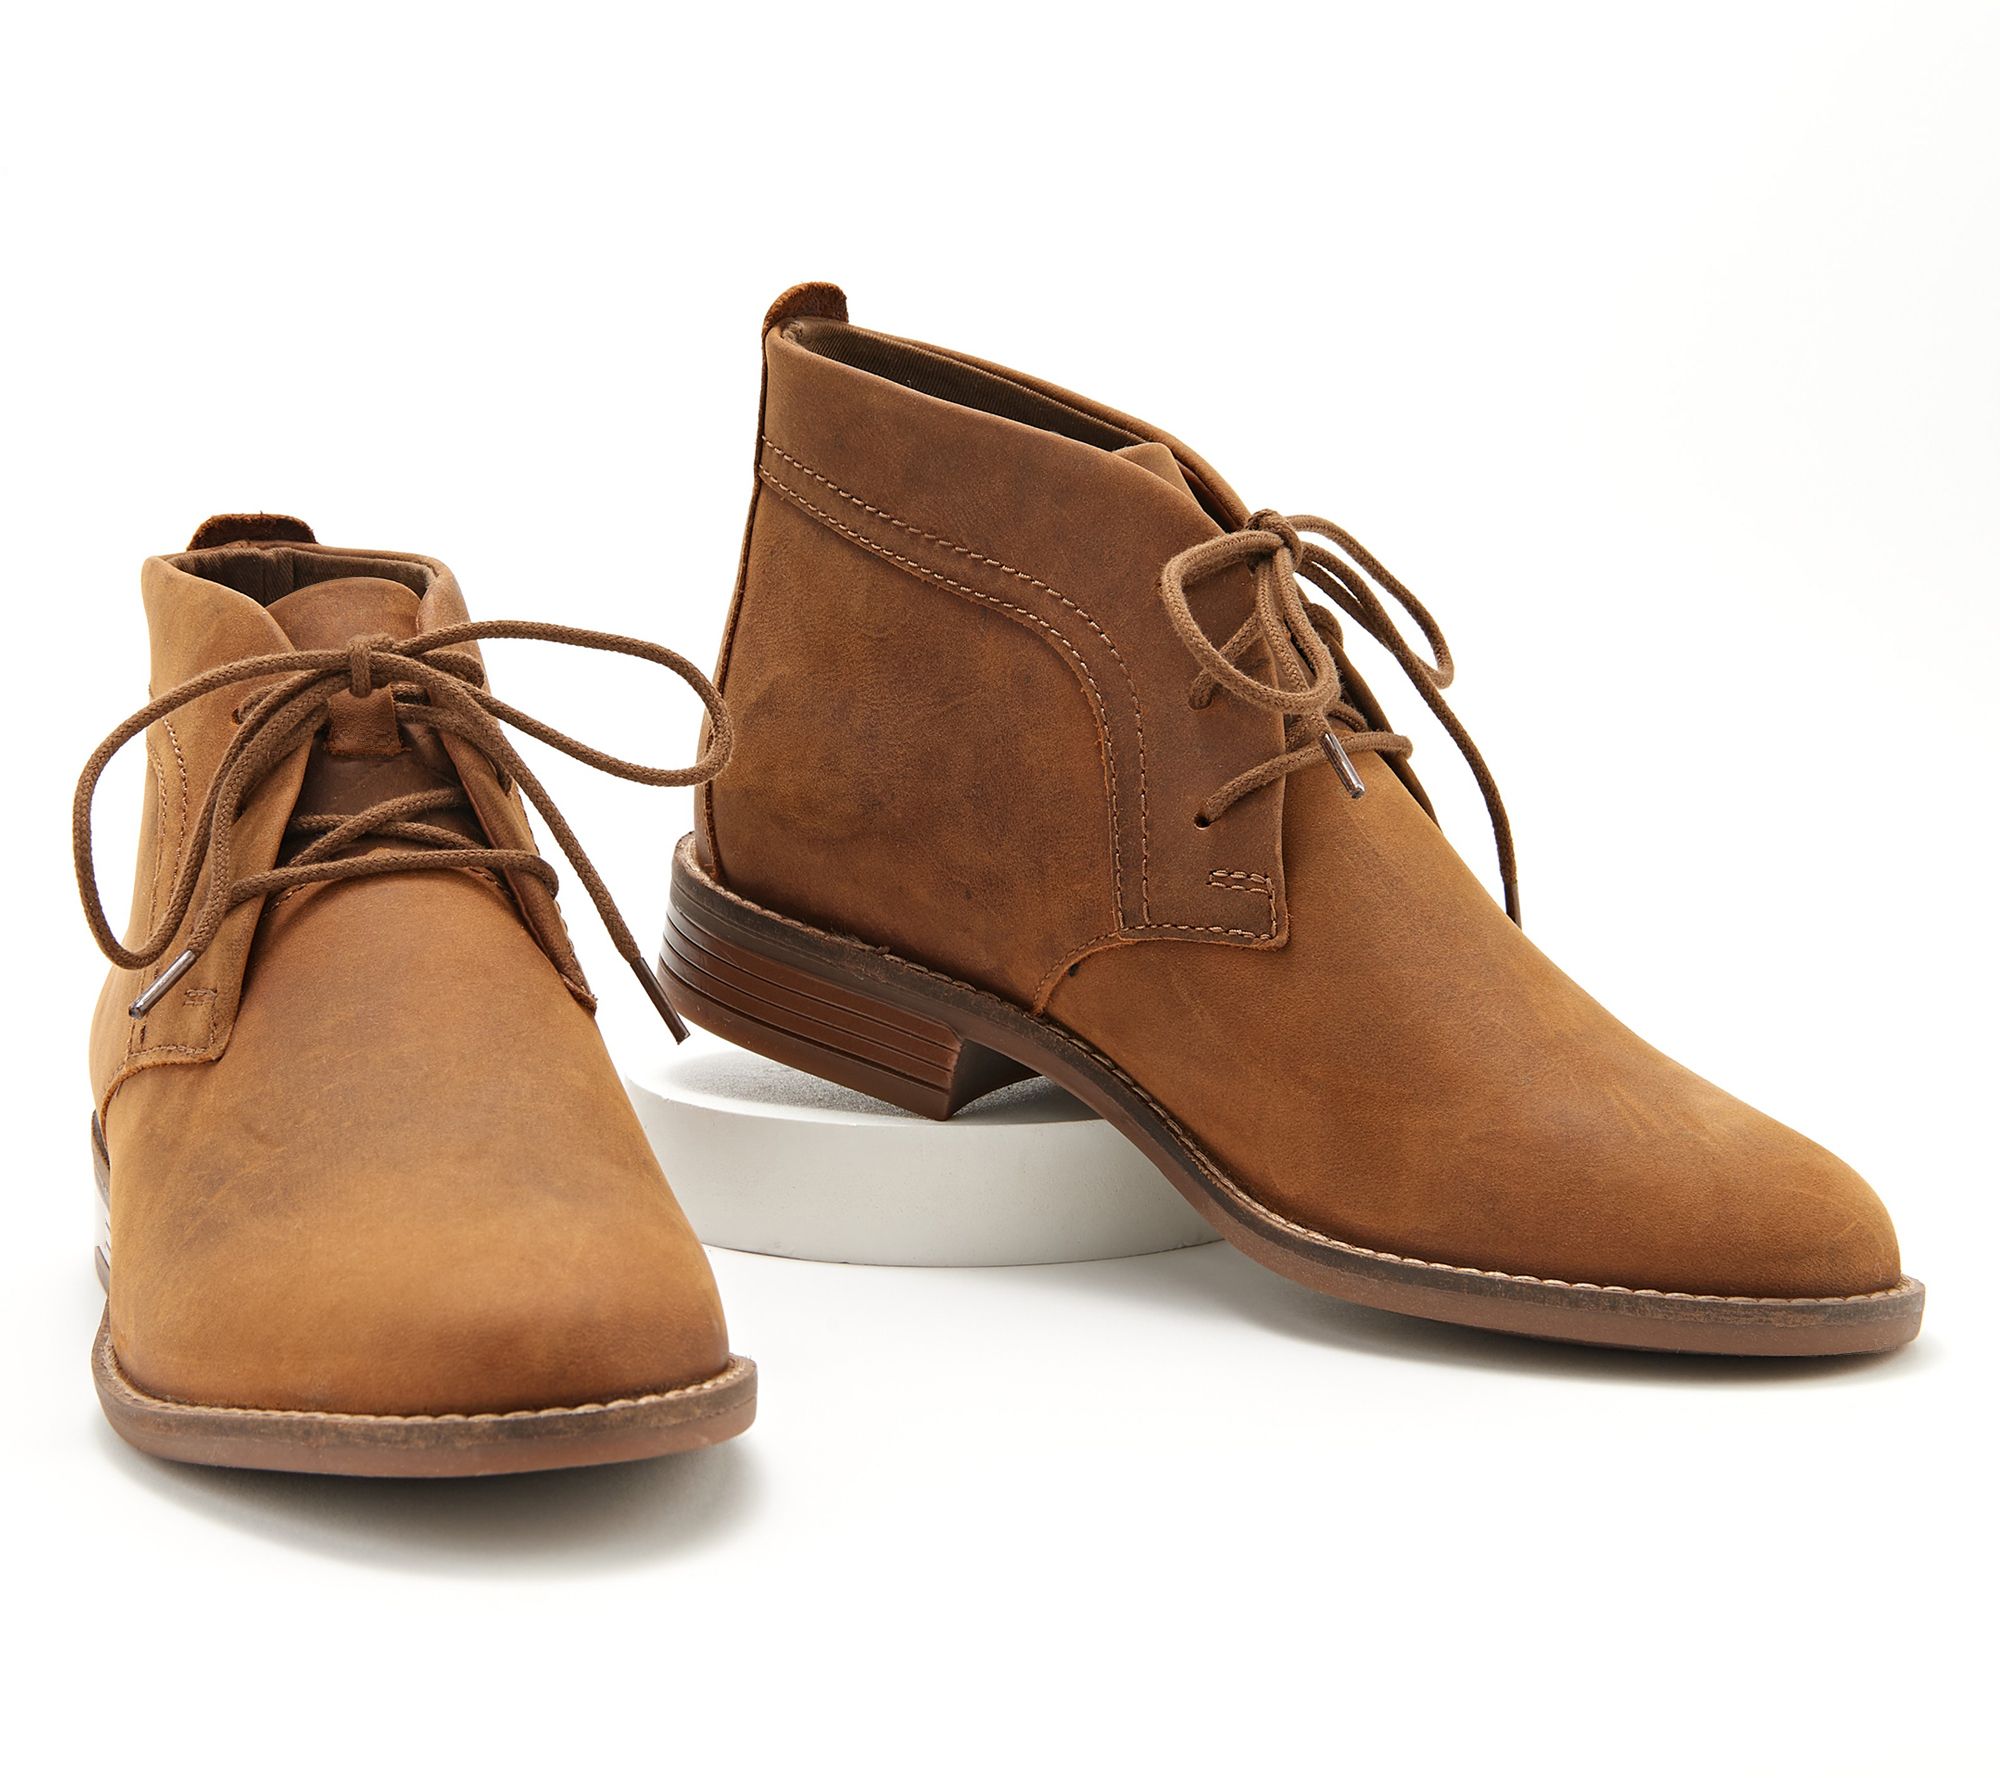 clarks lace up boots low heel